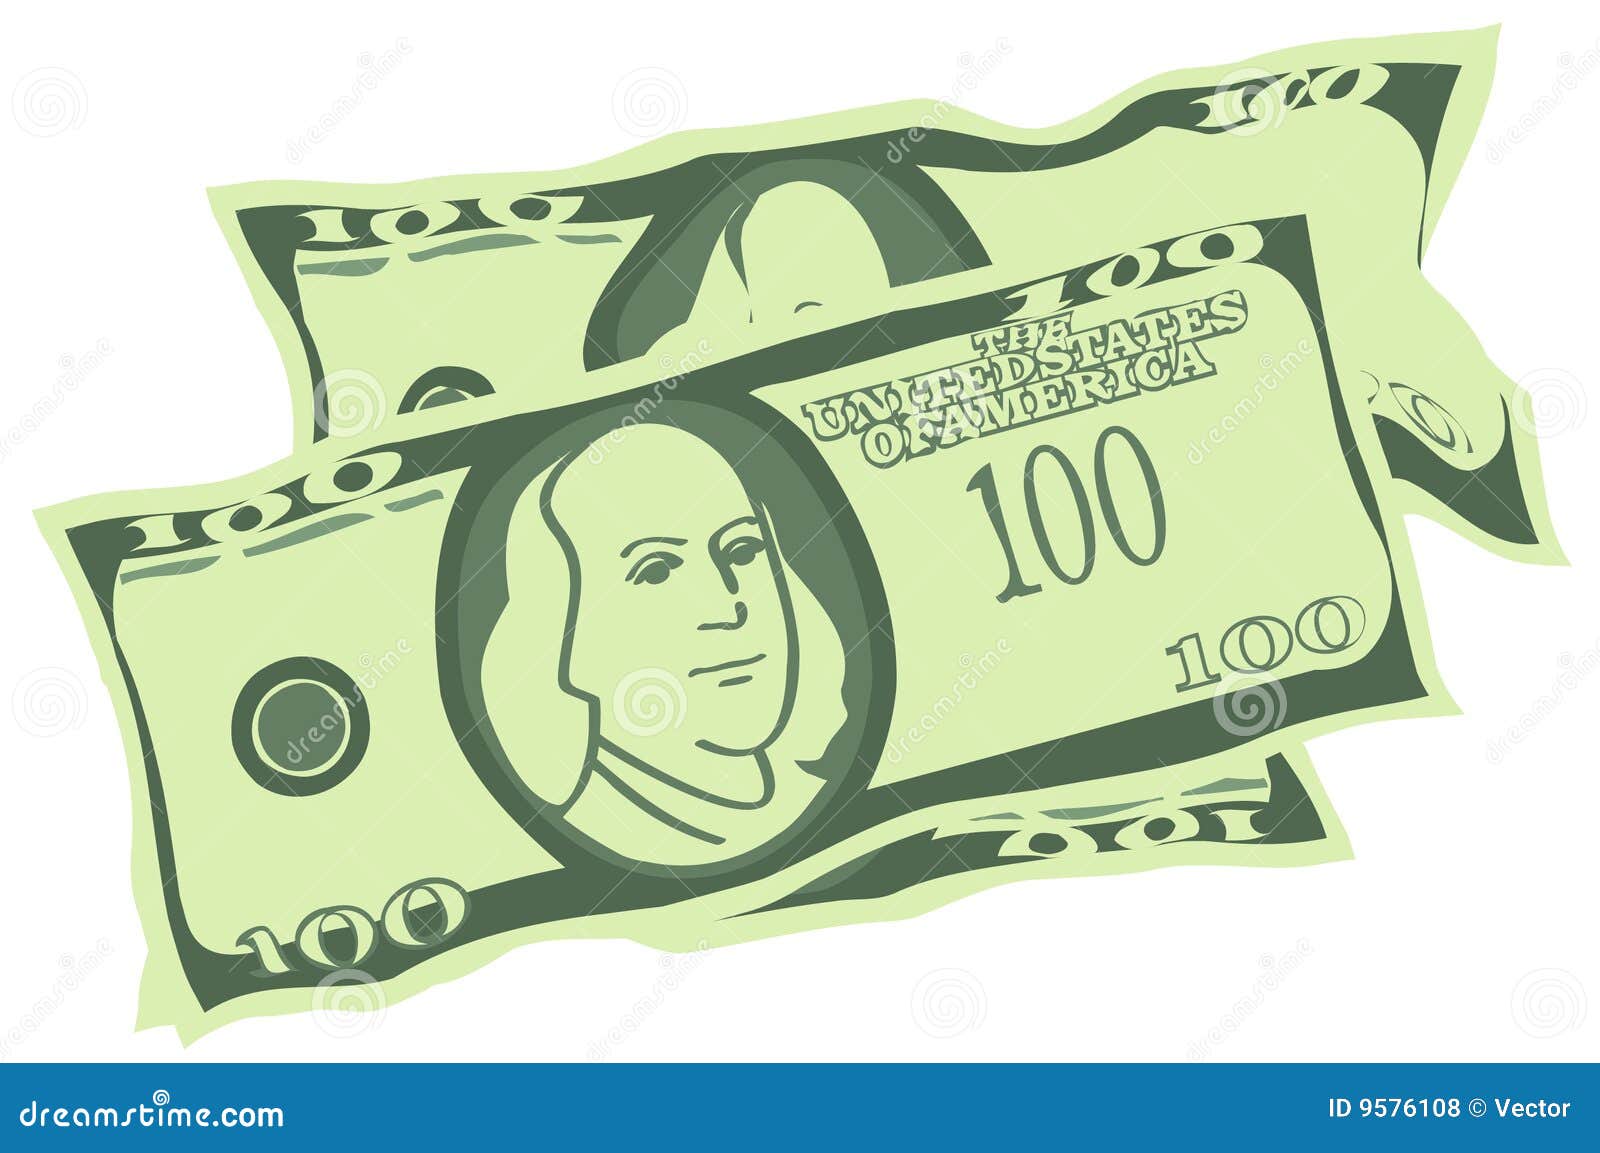 banknotes clipart - photo #34